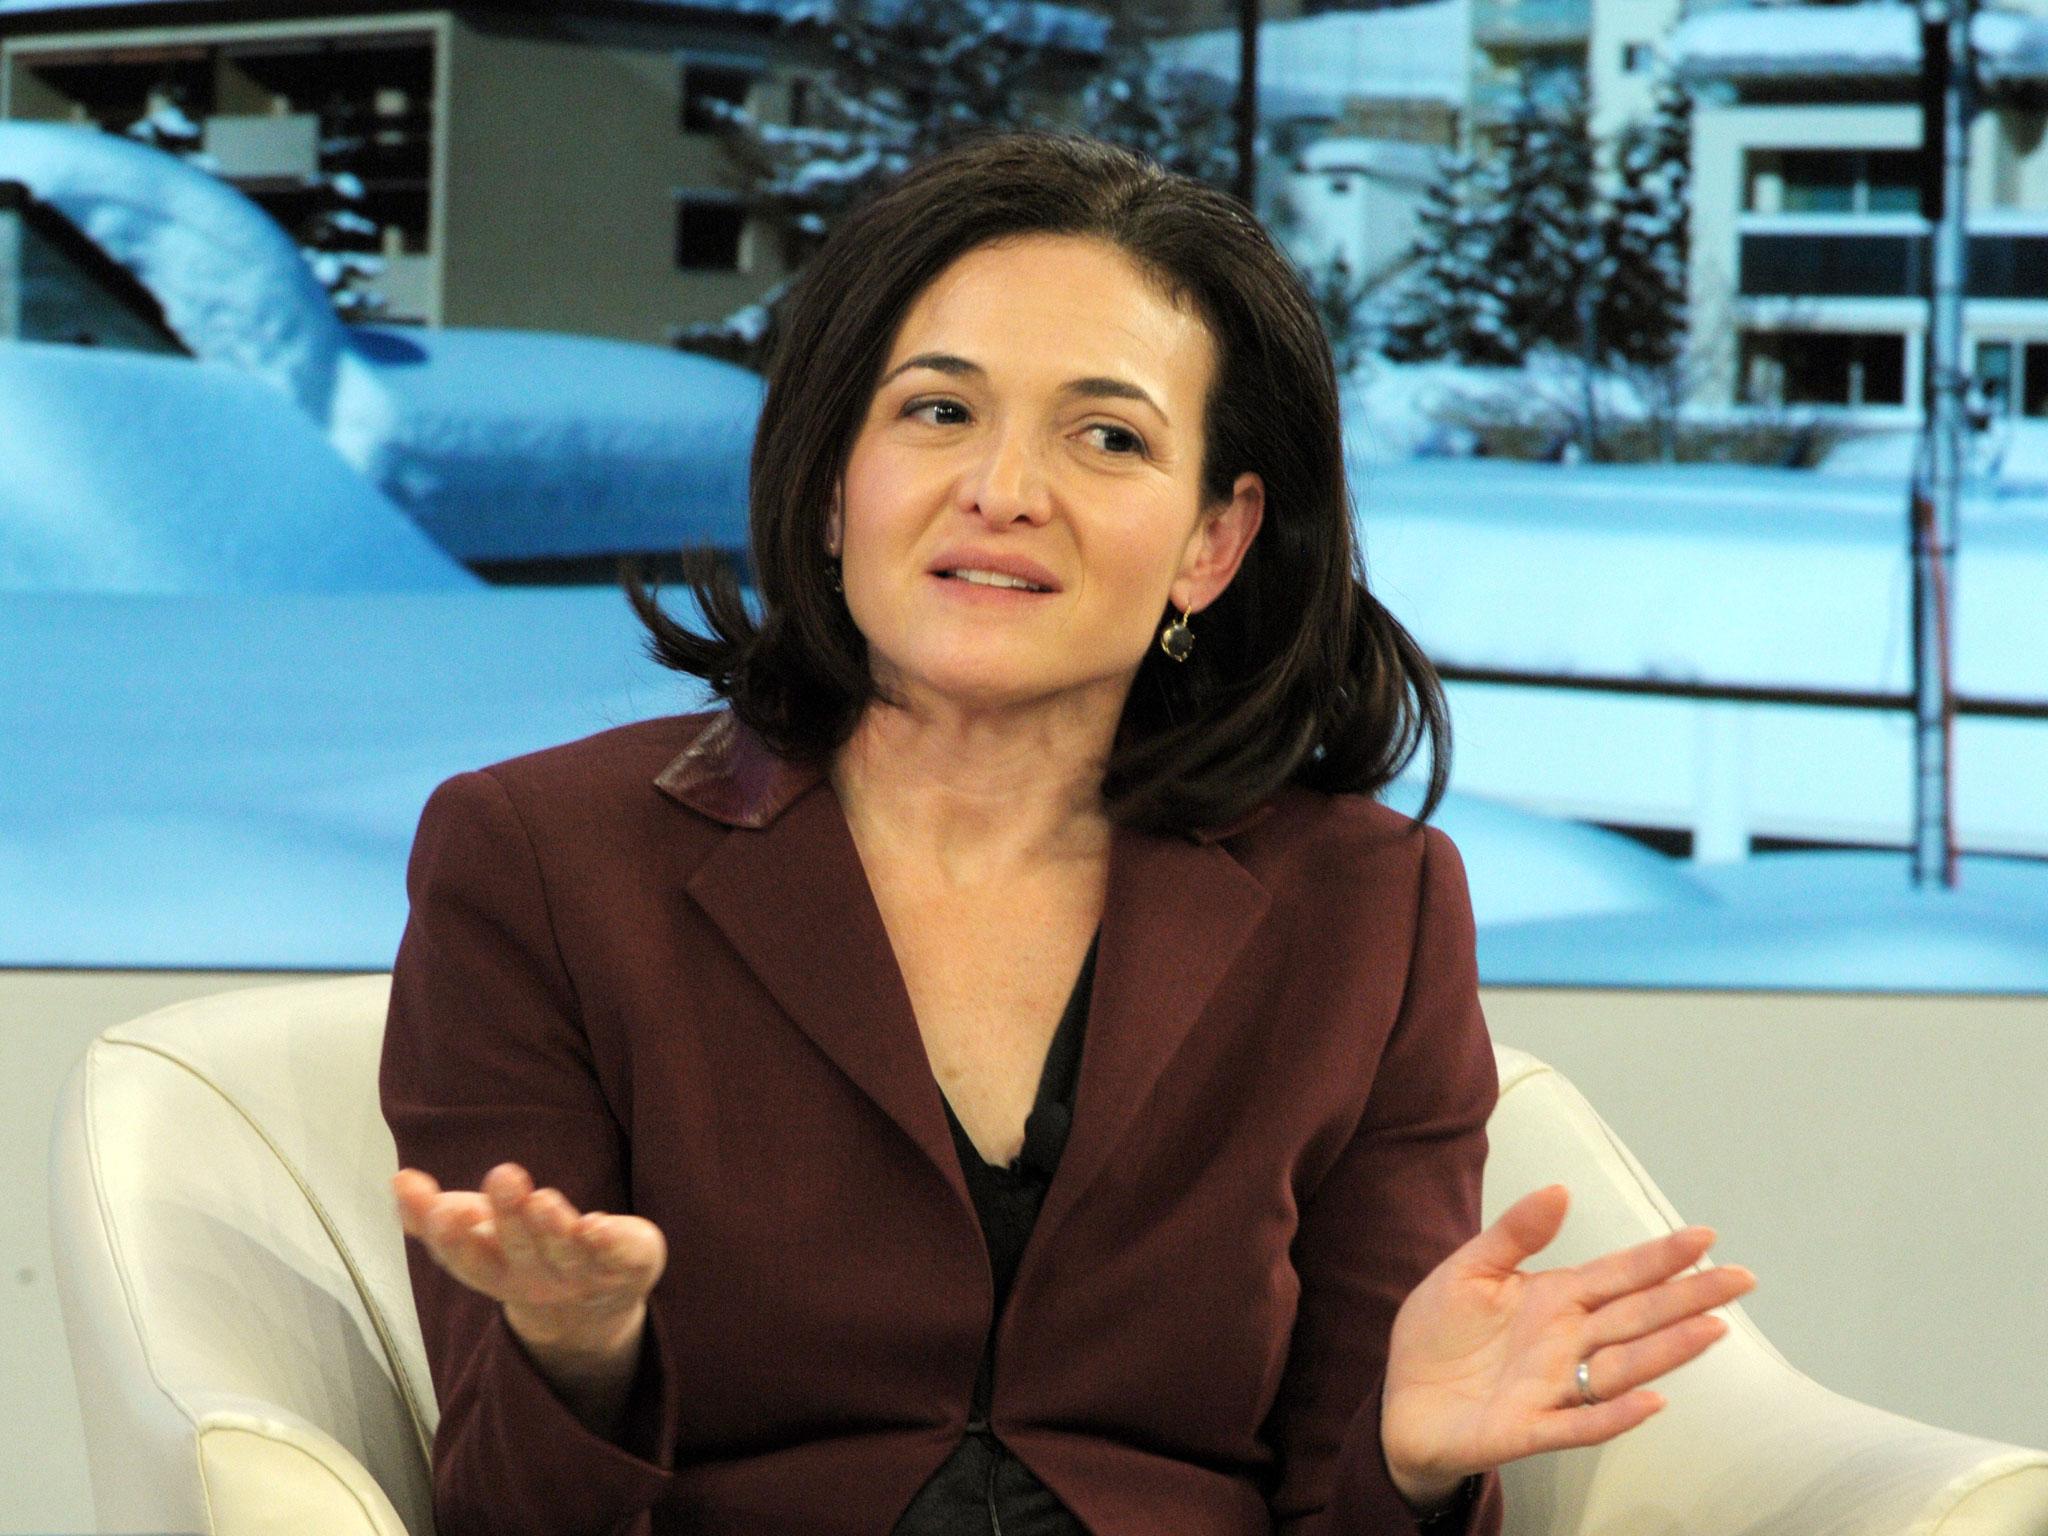 Talking on a panel in Davos, Sheryl Sandberg debated the need for quotas alonside IMF's Christine Lagarde